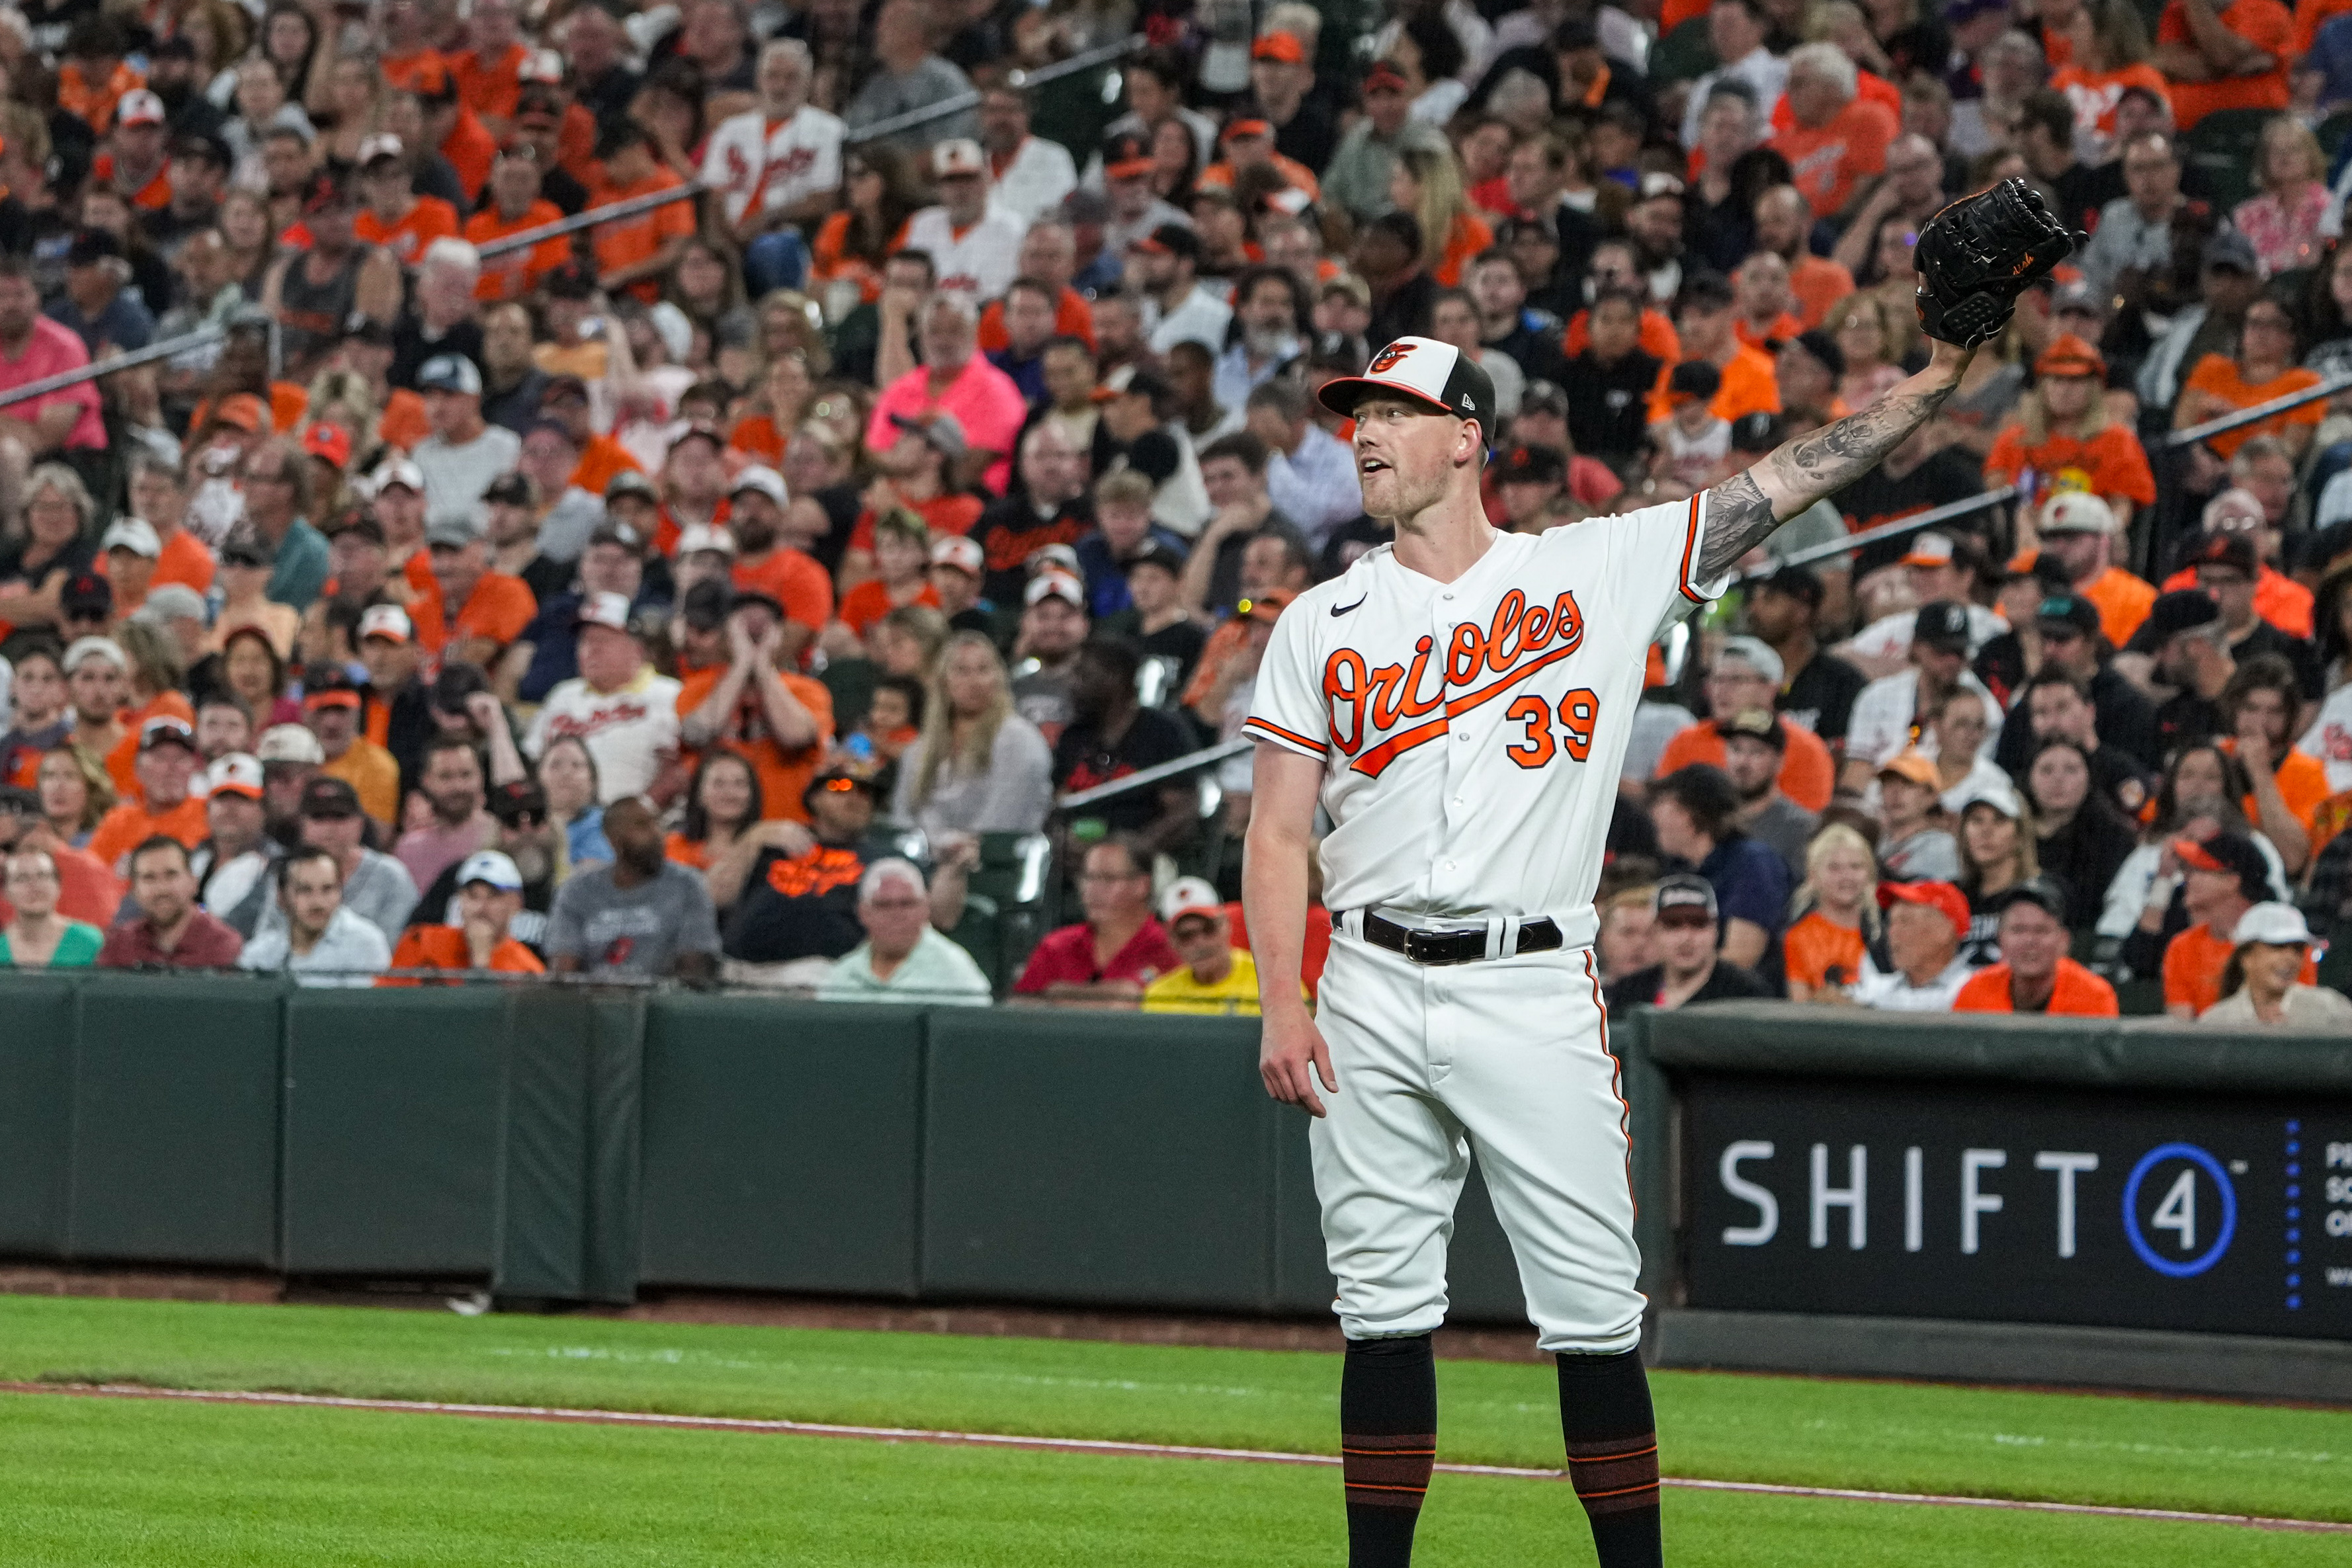 Dean Kremer sharp for Orioles in 1-0 win over Nationals - Washington Times